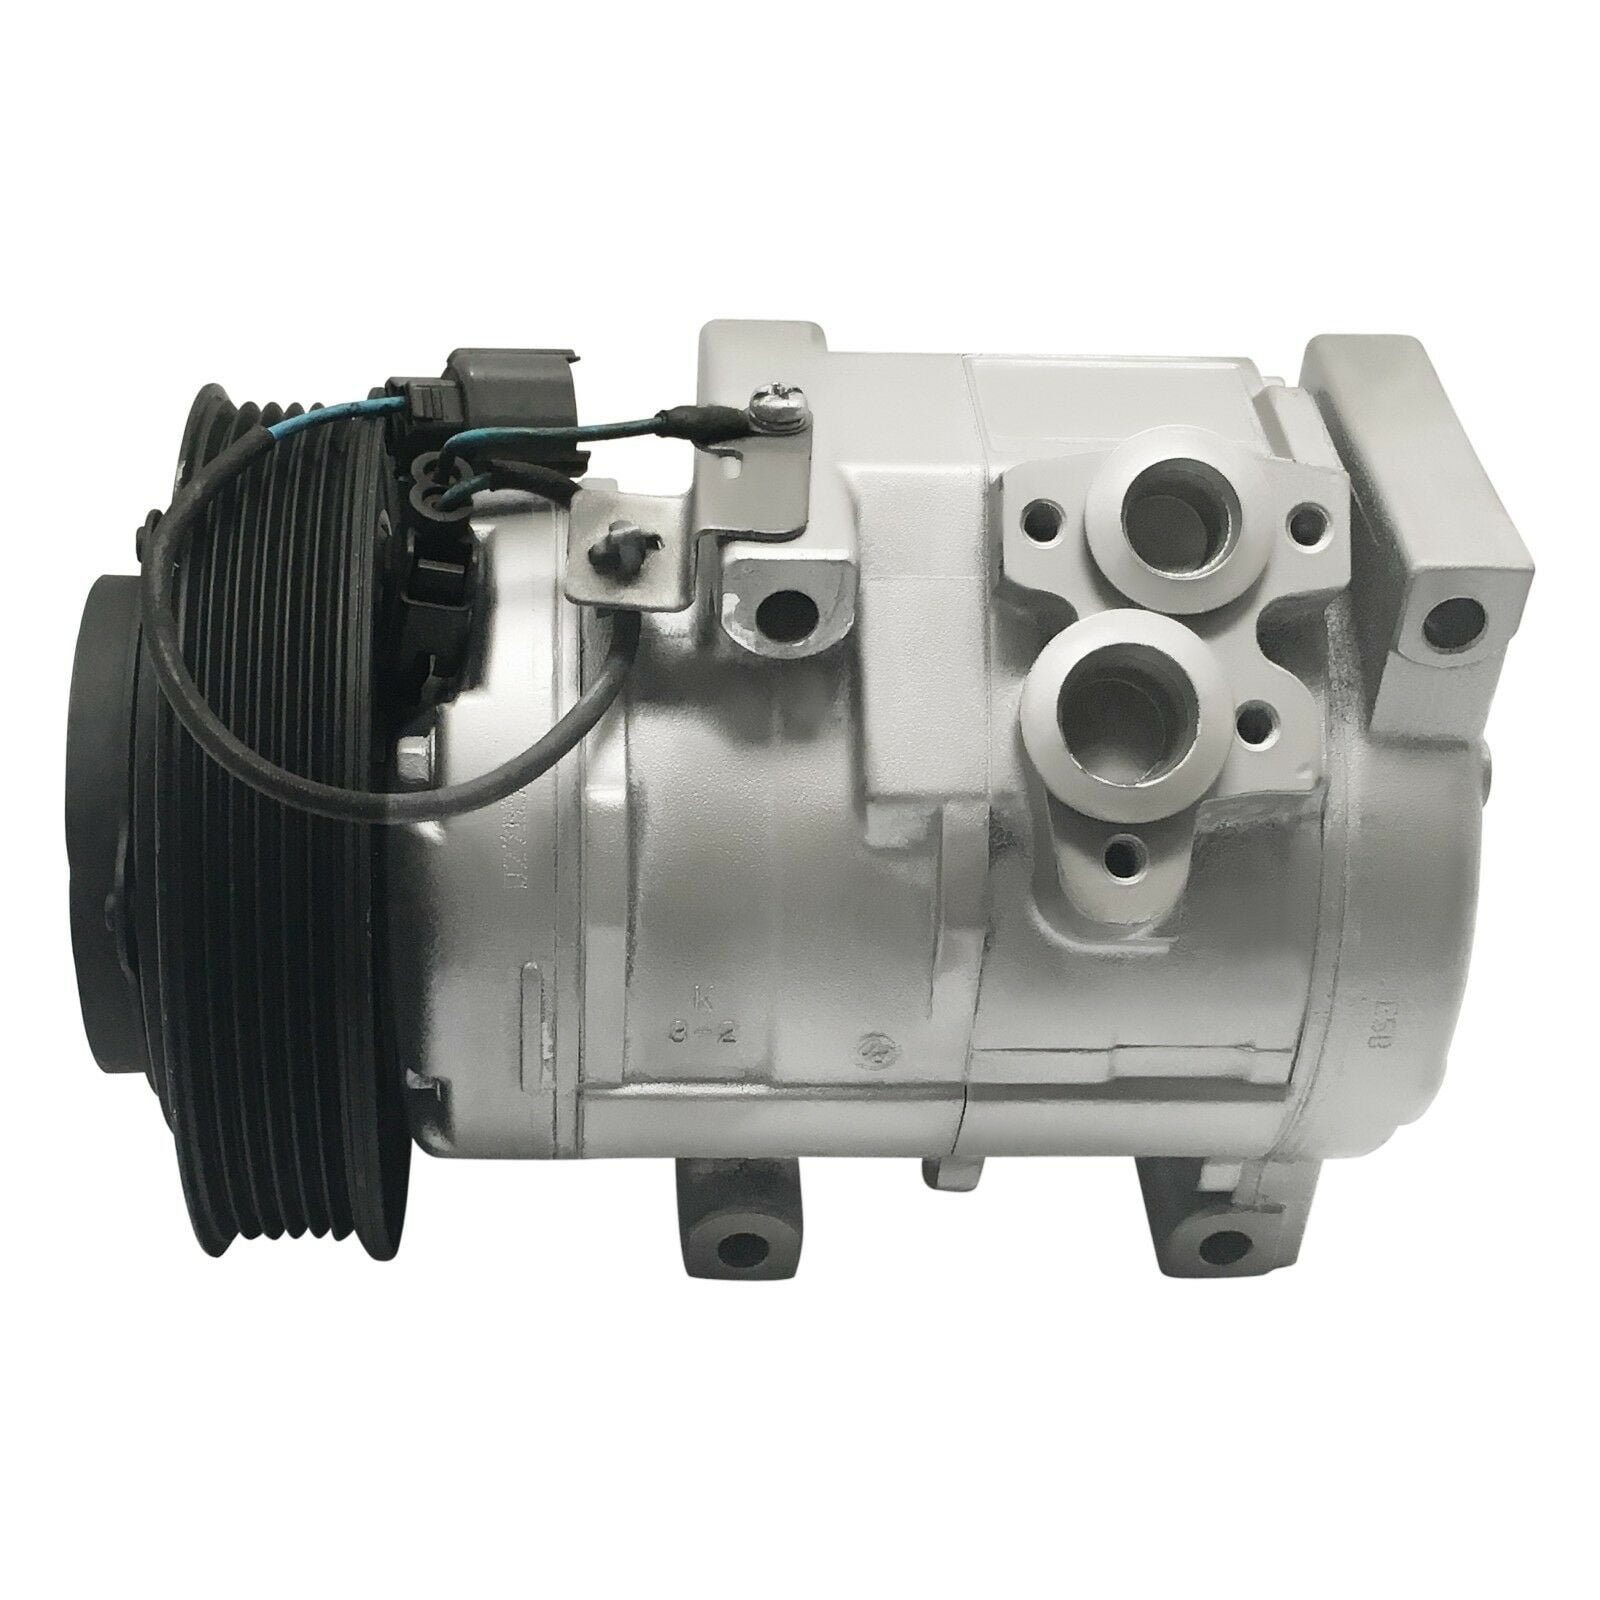 RYC Reman AC Compressor and A/C Clutch IG327 (Fits Honda Accord 3.0L 2003,  2004, 2005, 2006, 2007 Does Not Fit Honda Odyssey, Ridgeline and Pilot, or  Acura MDX)